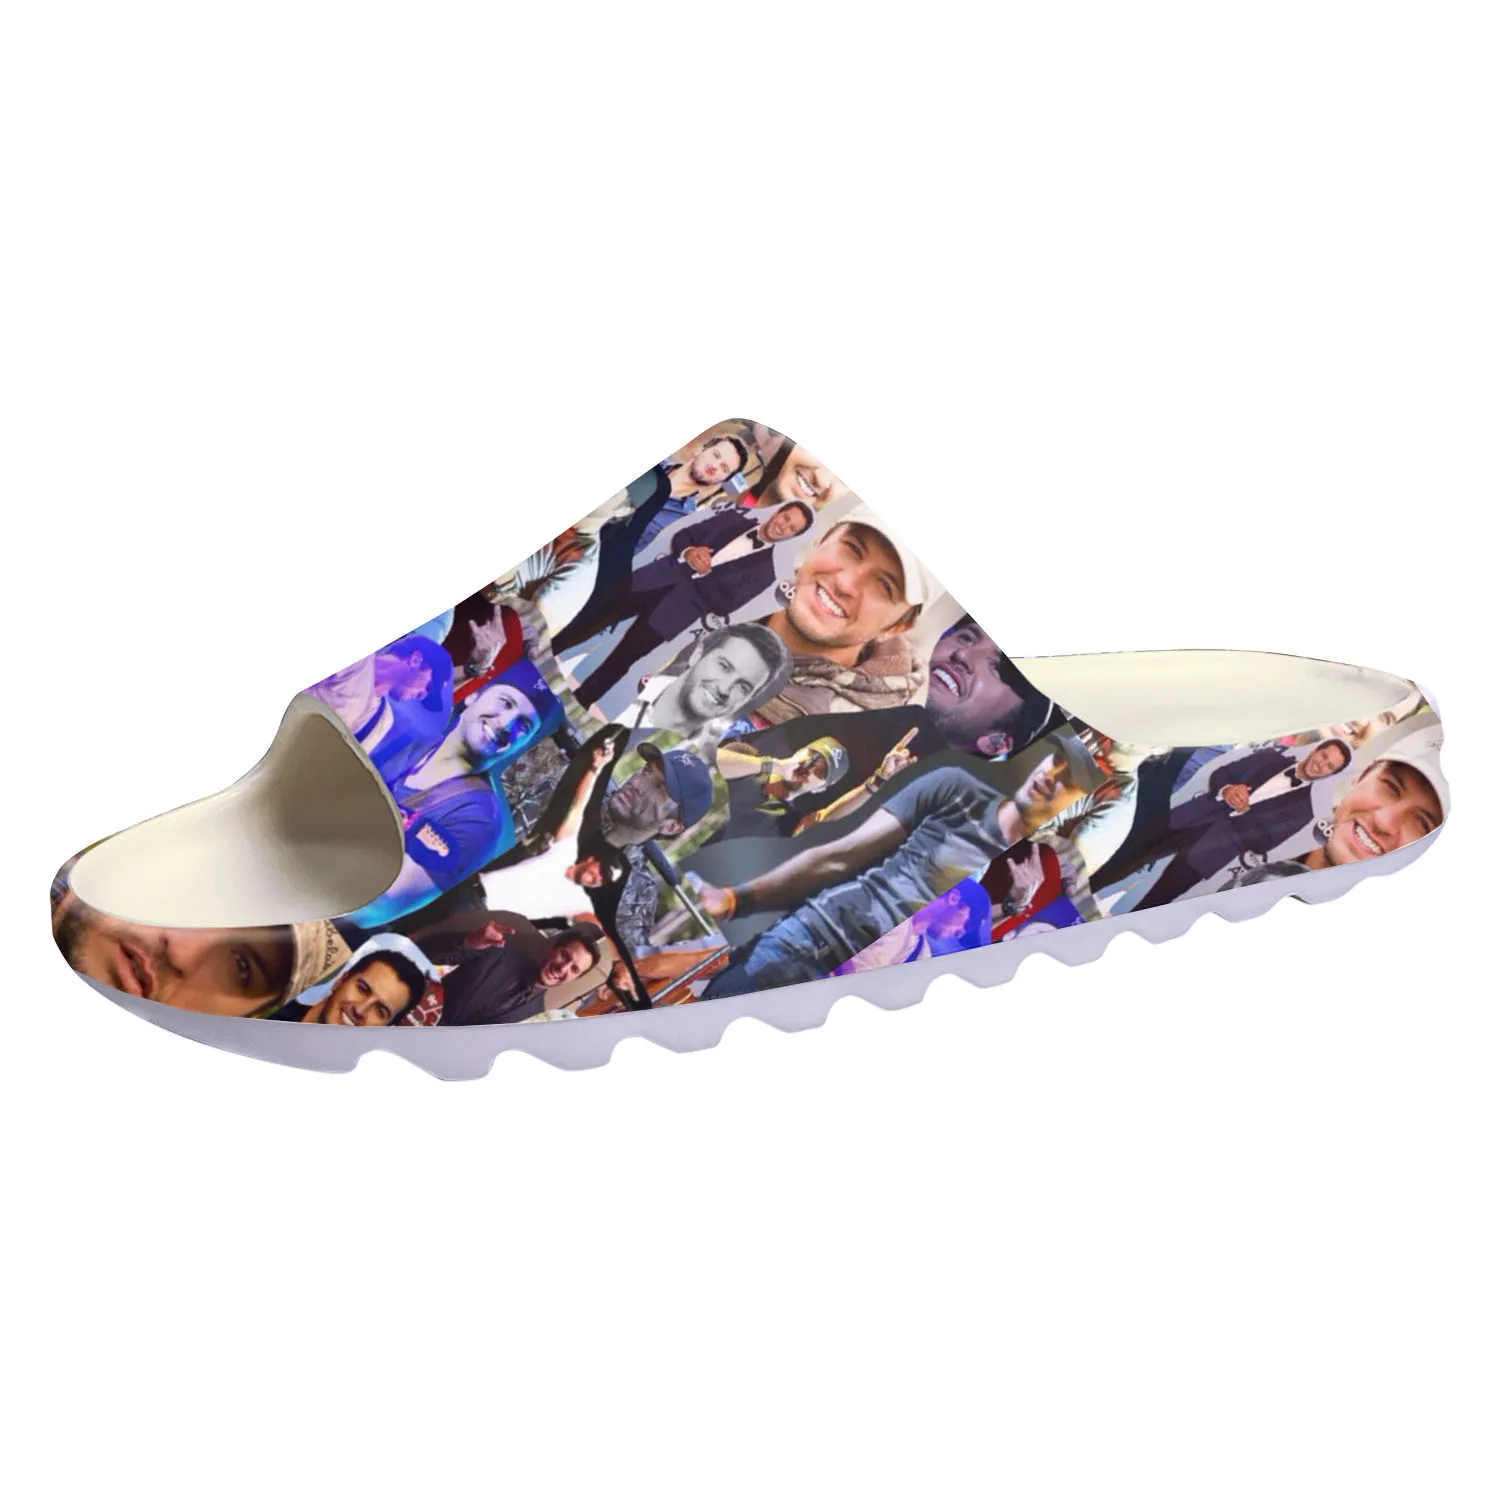 

Luke Bryan Hot Singer Soft Sole Sllipers Home Clogs Step on Water Shoes Mens Womens Teenager Bathroom Customize on Shit Sandals